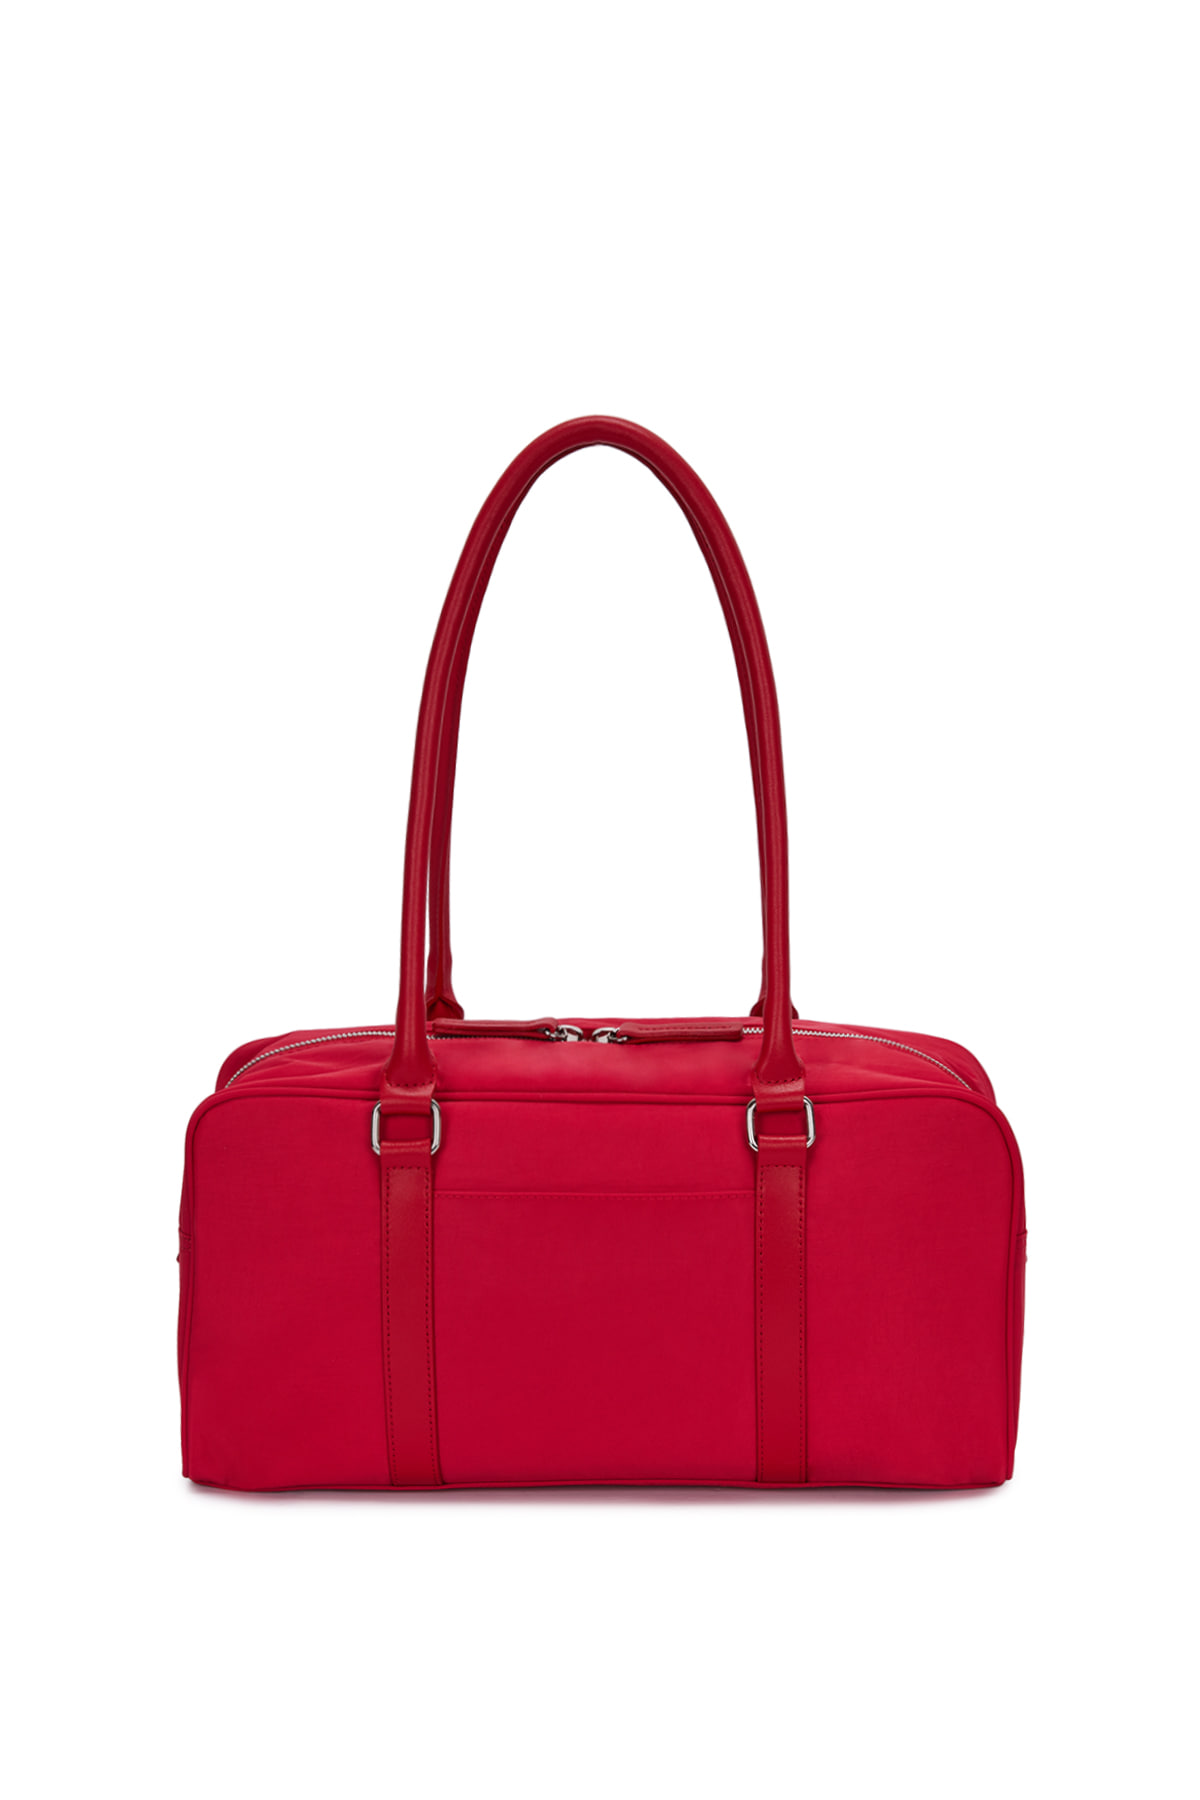 SPORTY TOTE BAG IN RED